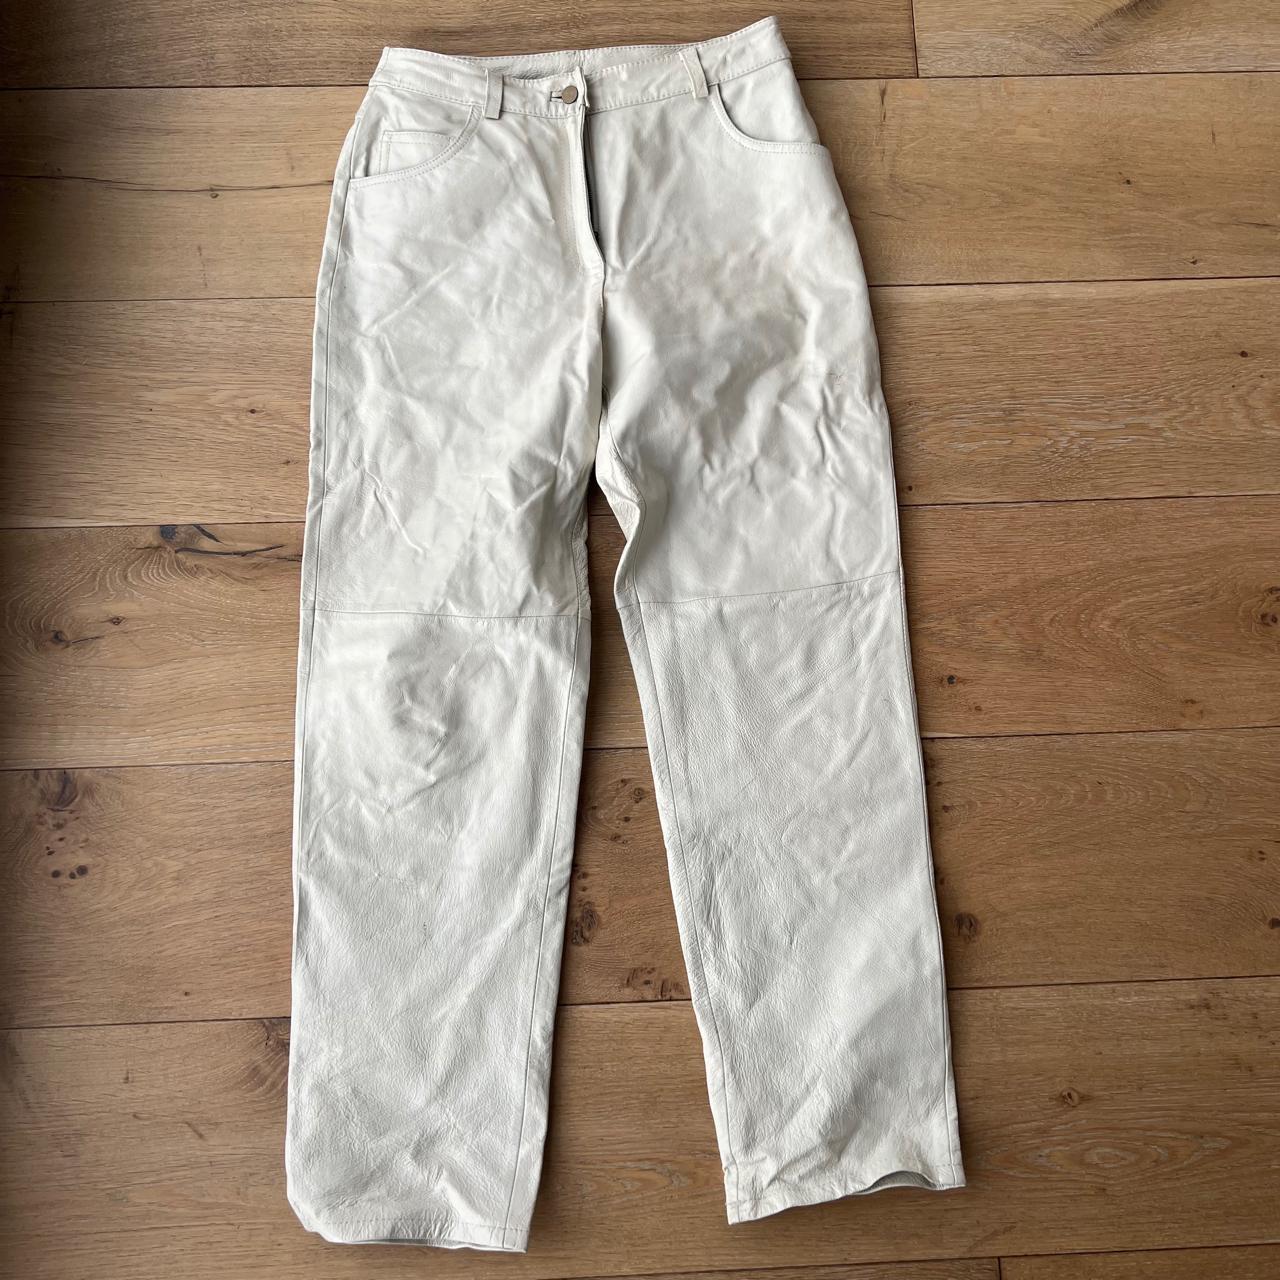 Women's White and Cream Trousers | Depop